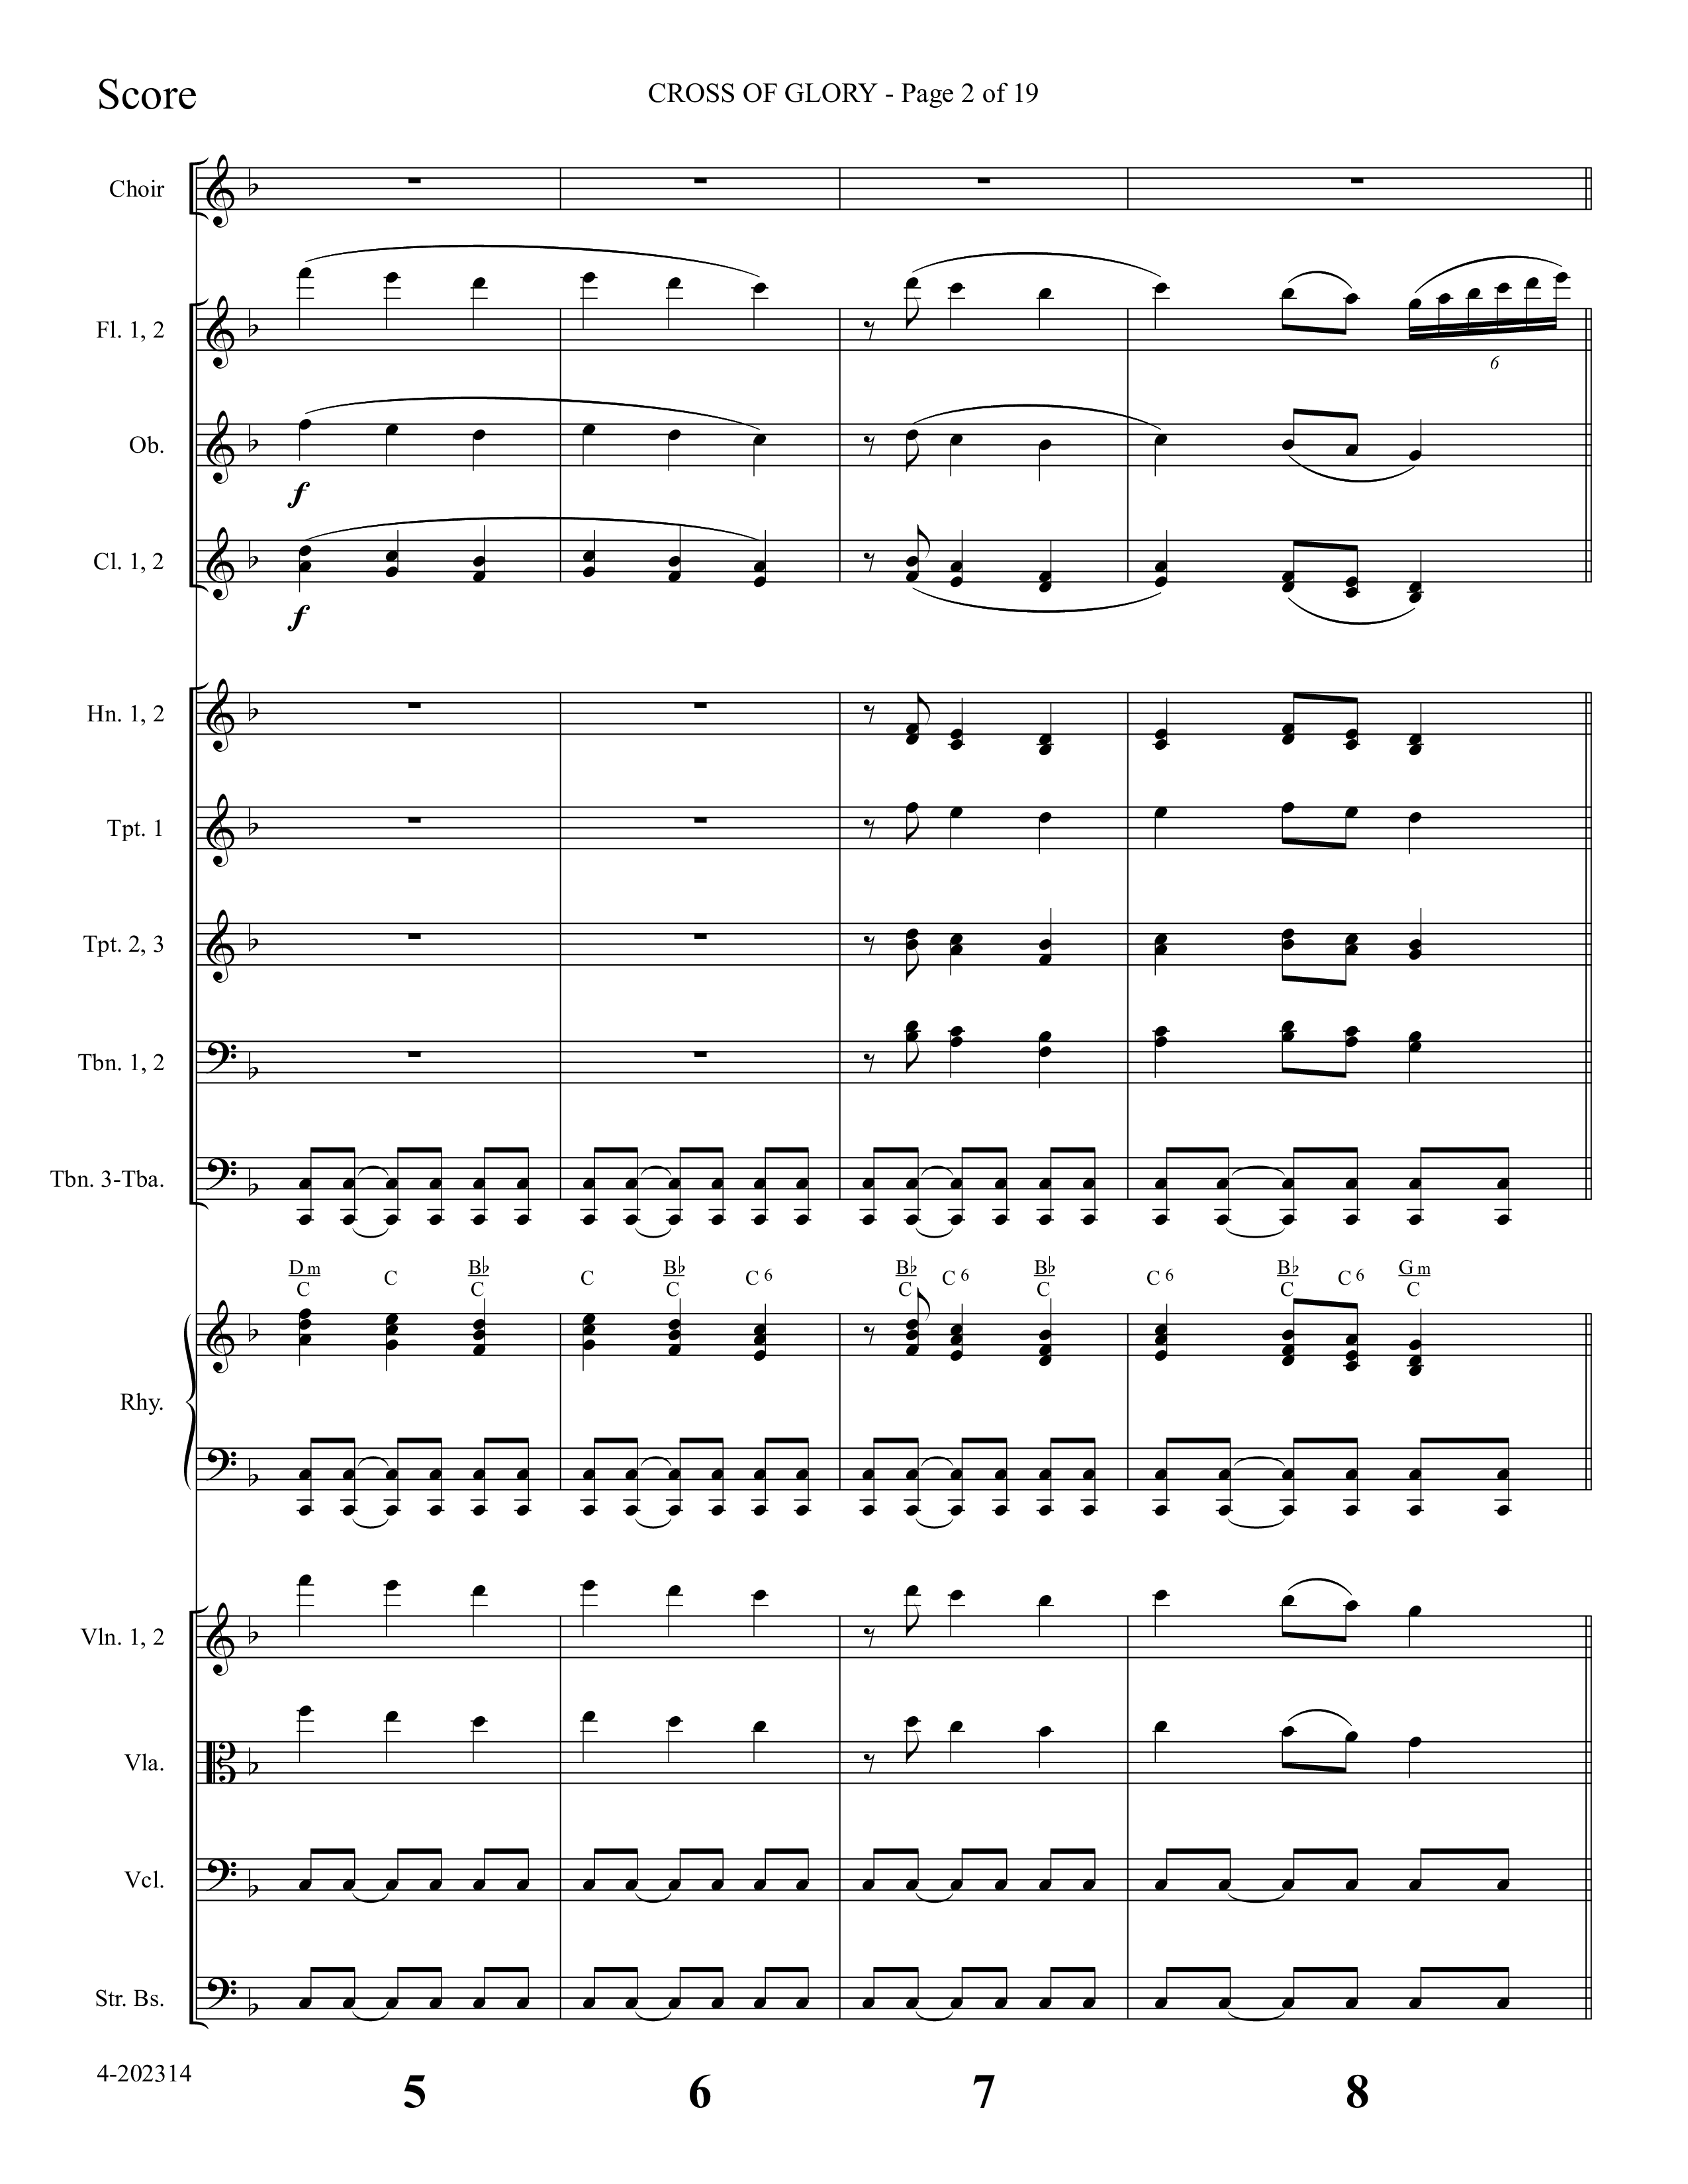 Cross Of Glory (Choral Anthem SATB) Conductor's Score (Foster Music Group / Arr. Marty Parks)